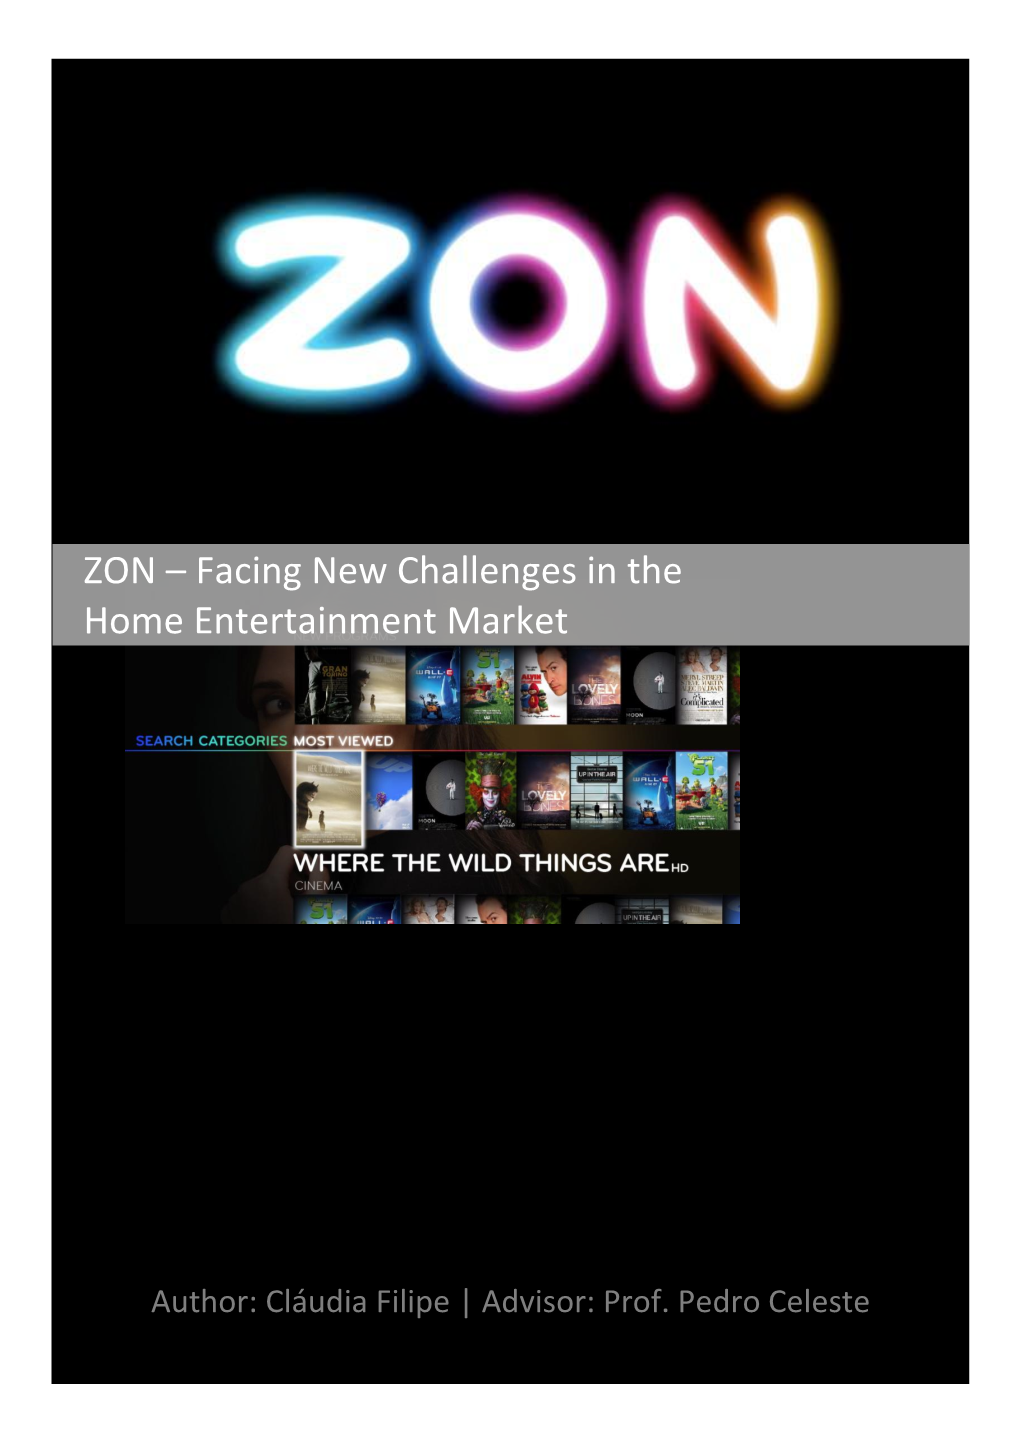 ZON – Facing New Challenges in the Home Entertainment Market”